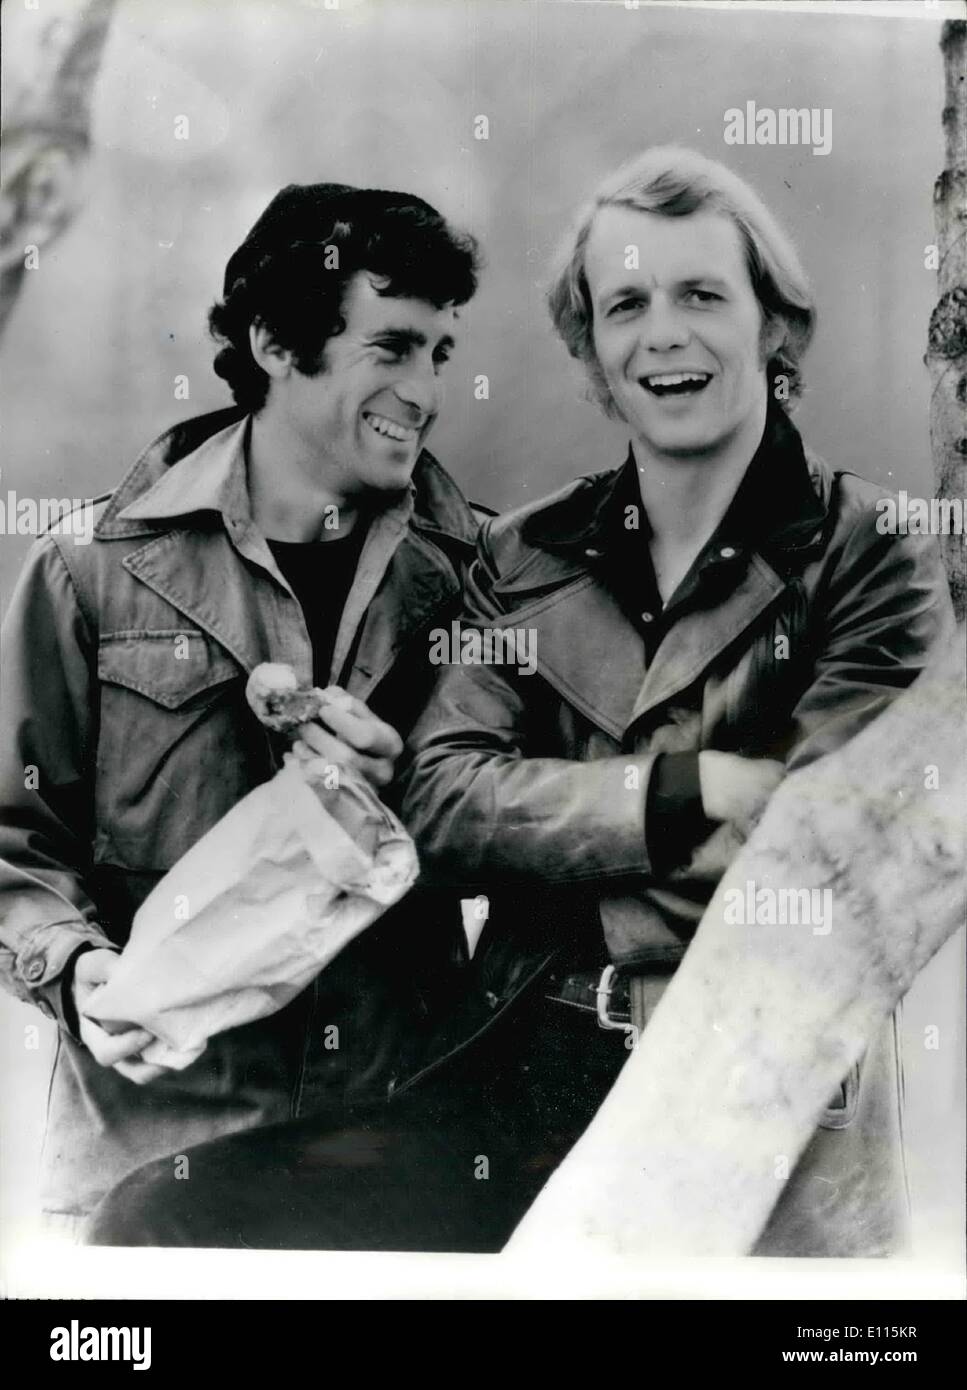 Jan. 01, 1976 - STARSKY AND HUTCH TO SPLIT -UP? It Looks like the famous pair is the television series ''Starsky and Hutch'' may be comming to an end. The Stars of the show,Paul Micheal Glaser, (Starsky),and David Soul,as Hutch,The one that wants to leave, the series is Paul Michael Glaser.He said this while filming the next series in the Californian desert. He hopes to involve himself in more feature films and a broader range of acting.His partner David Soul, hopes to persuade him to stay in the series. PHOTO SHOWS The two famous actors of the series Paul Michael Glaser, left,and DAVID SOUL. Stock Photo